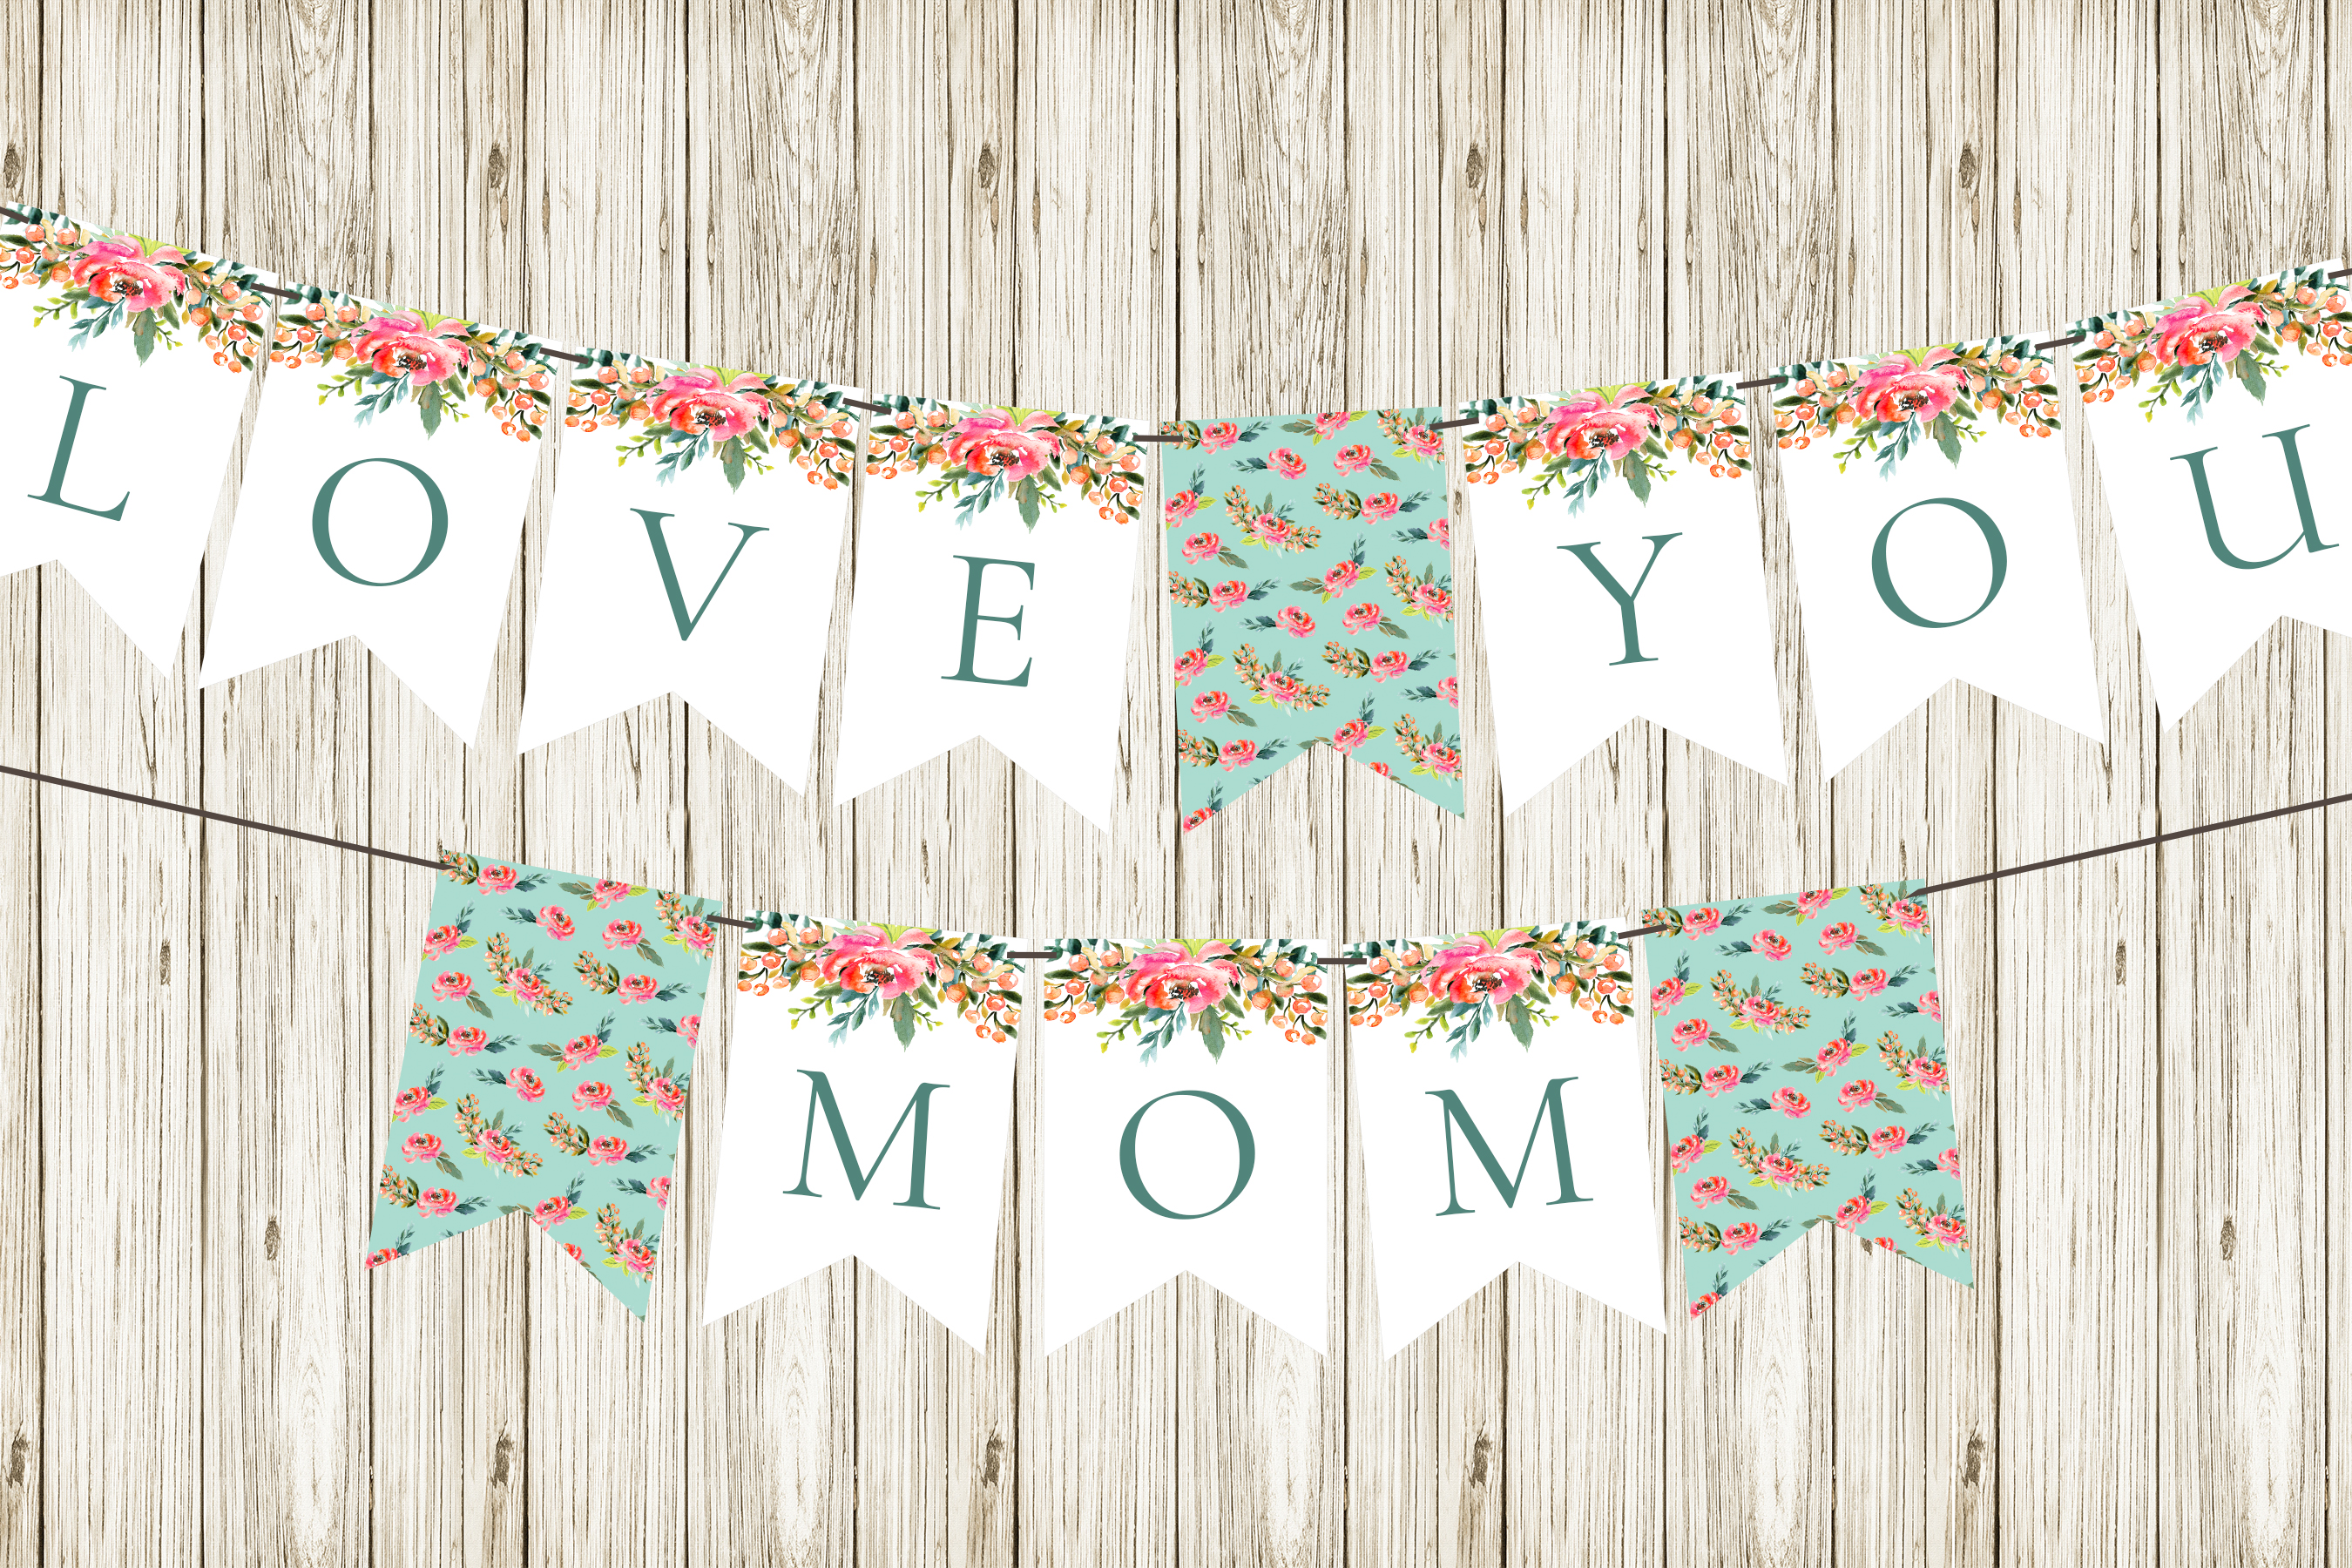 diy-mother-s-day-bunting-free-printable-mother-s-day-decorations